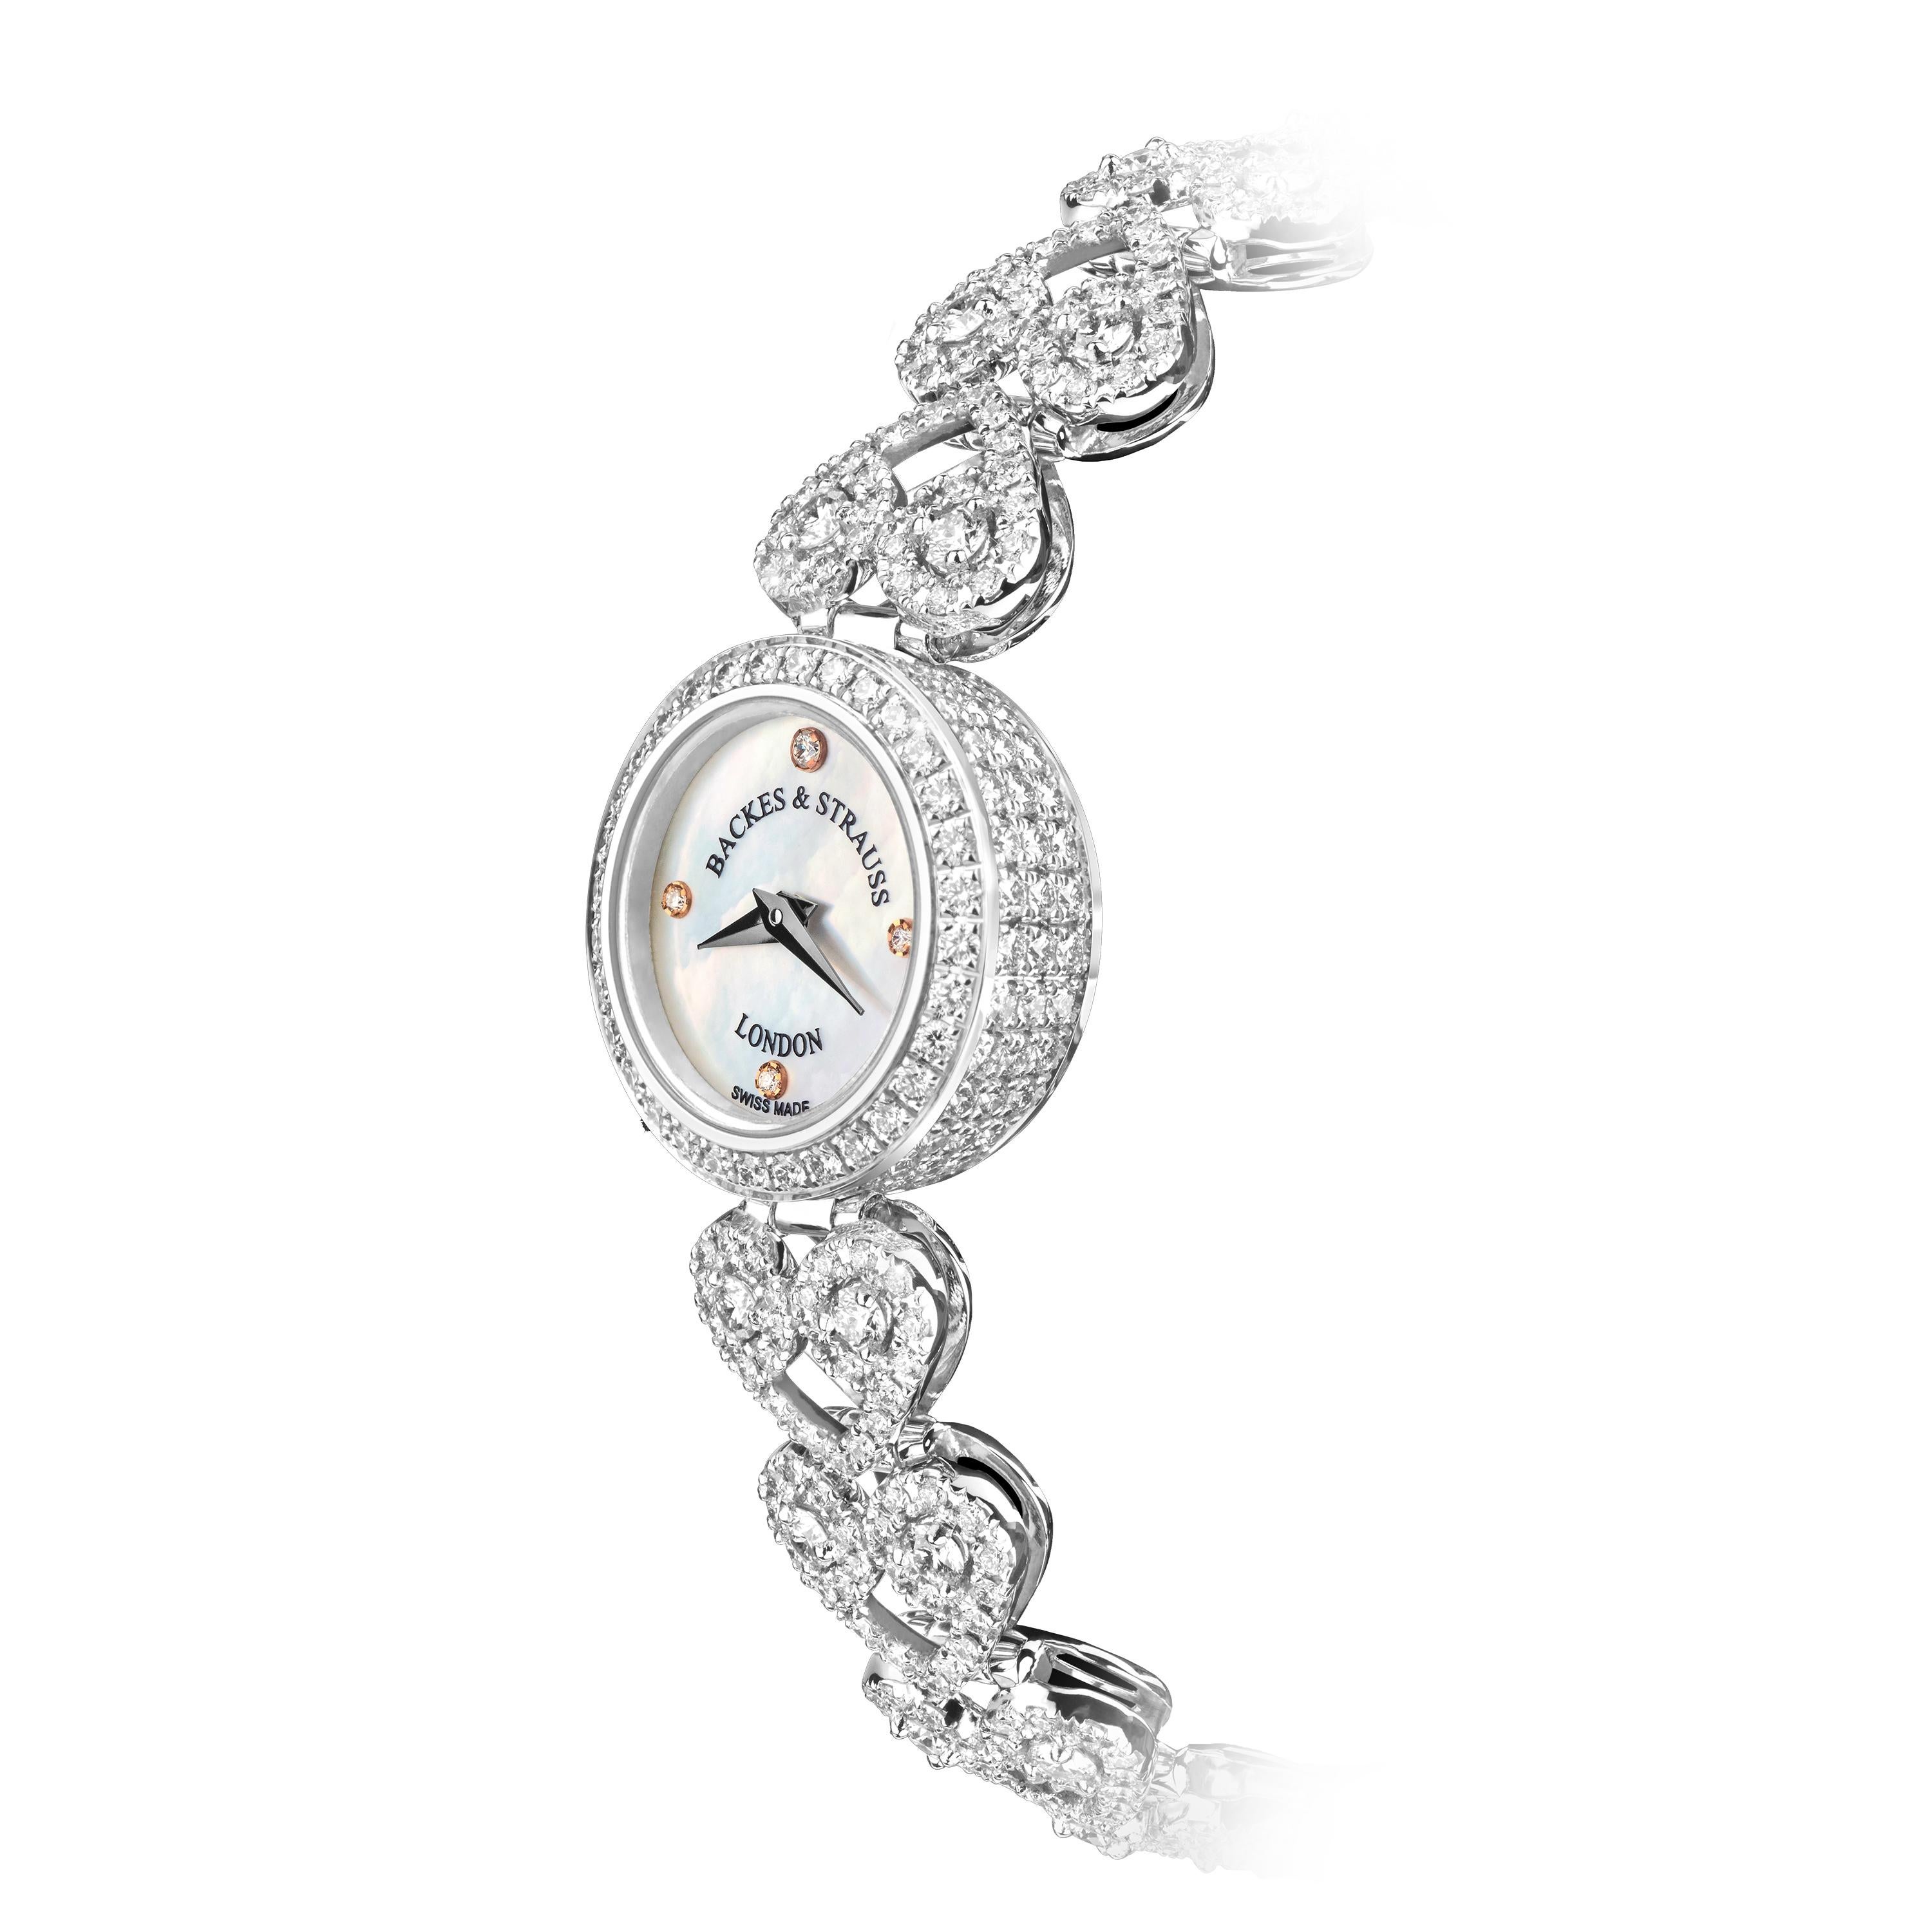 The Lady Victoria is a luxury diamond watch for women crafted in 18kt White gold, featuring the mother-of-pearl dial, quartz movement. The case, dial, bracelet and buckle are set with white Ideal Cut diamonds. It is a 18mm classy cocktail watch with